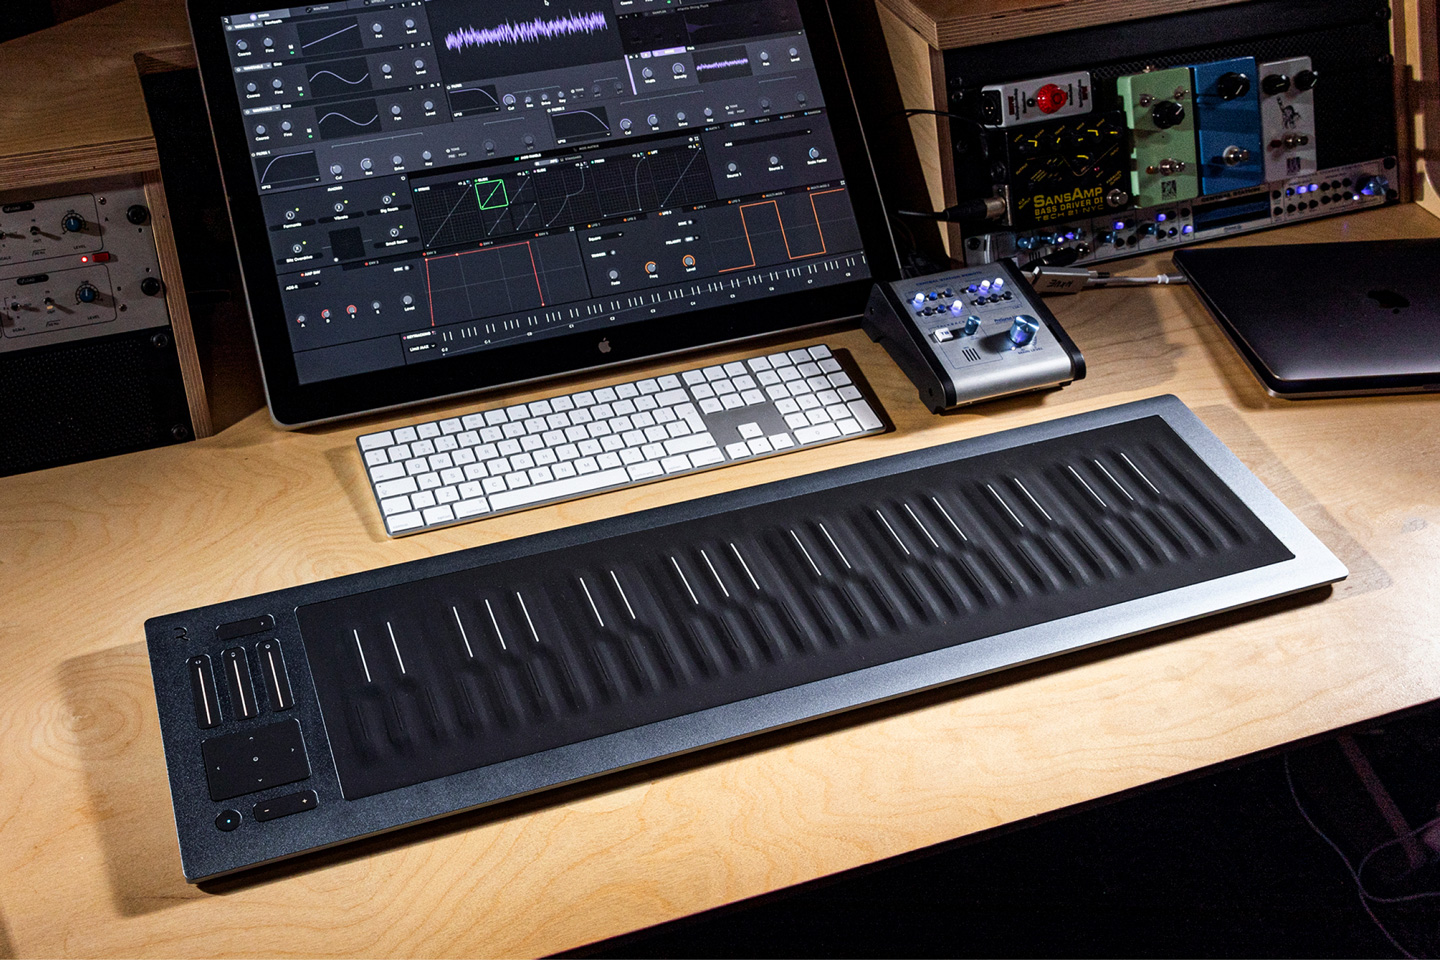 #ROLI announces the Seaboard RISE 2, an incredibly fluid keyboard surface made for ultimate sonic expression